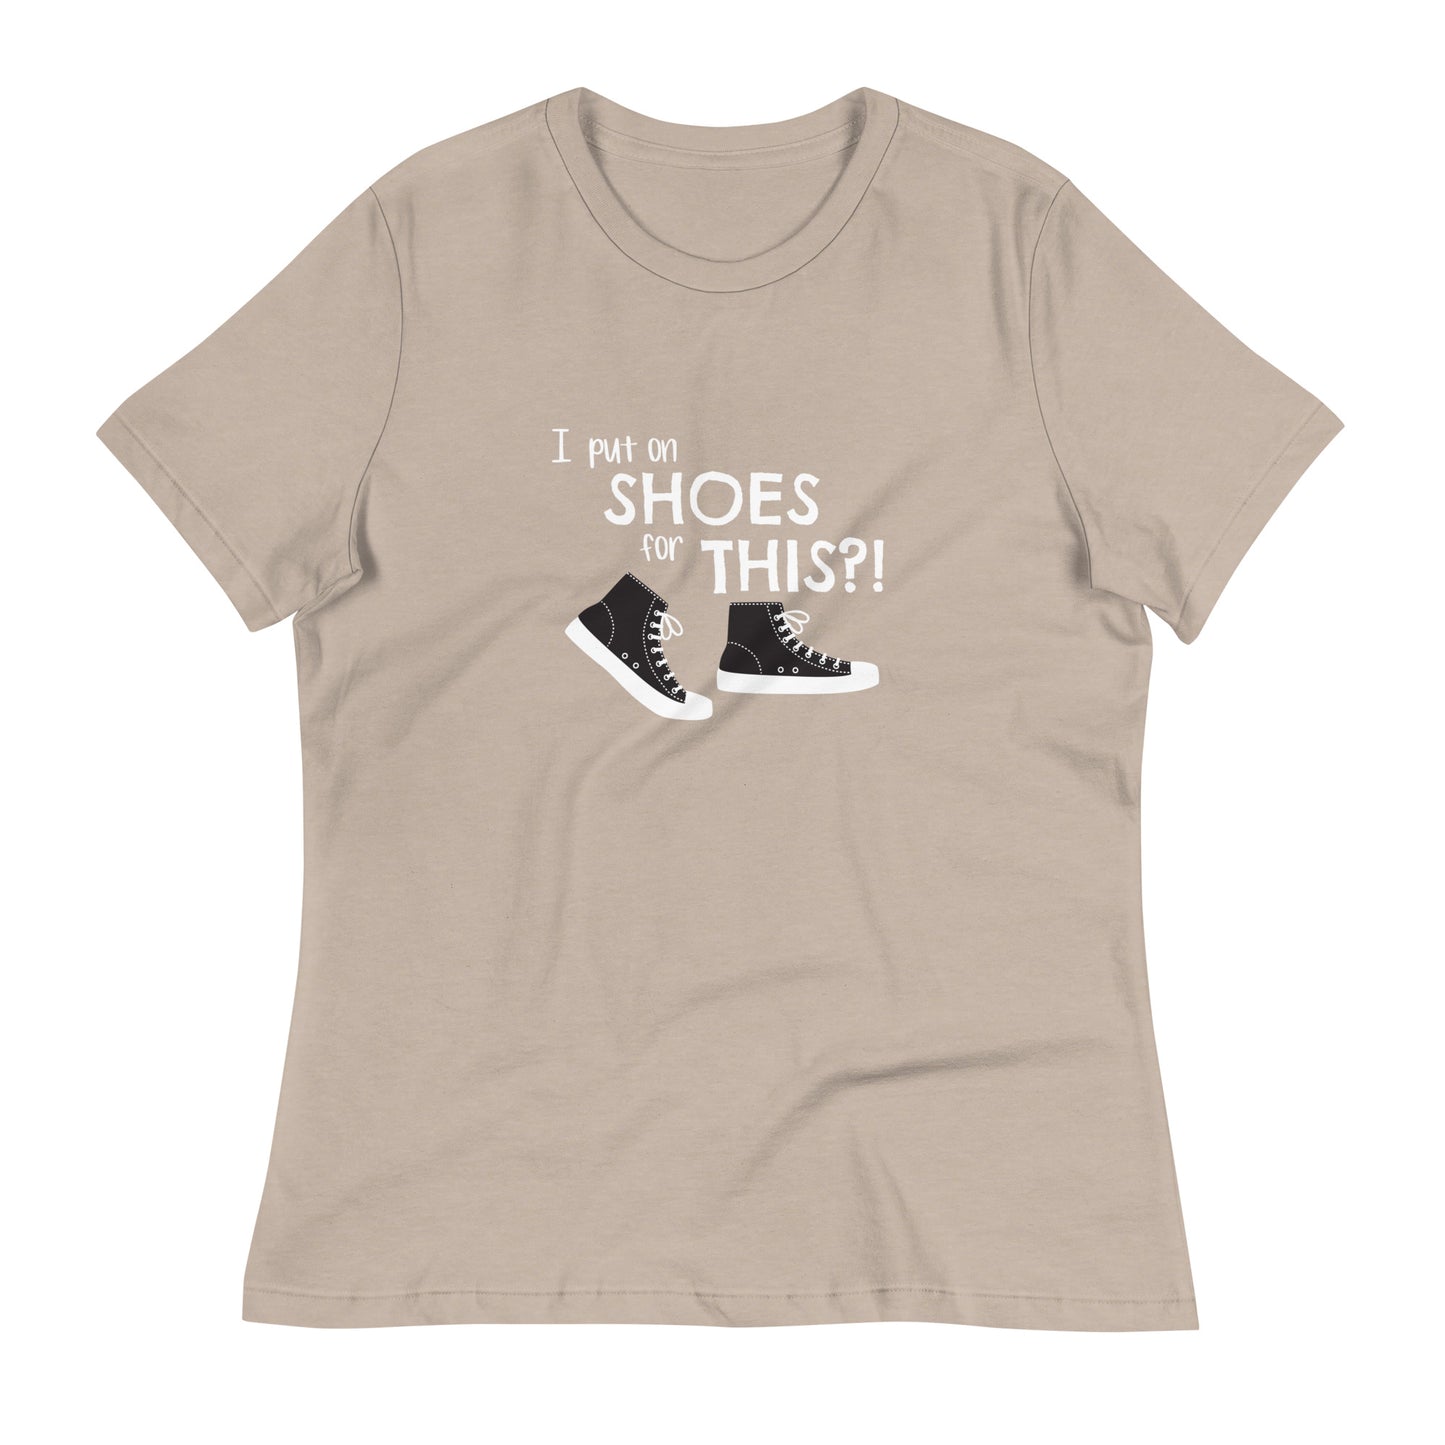 Heather Stone women's relaxed fit t-shirt with graphic of black and white canvas "chuck" sneakers and text: "I put on SHOES for THIS?!"